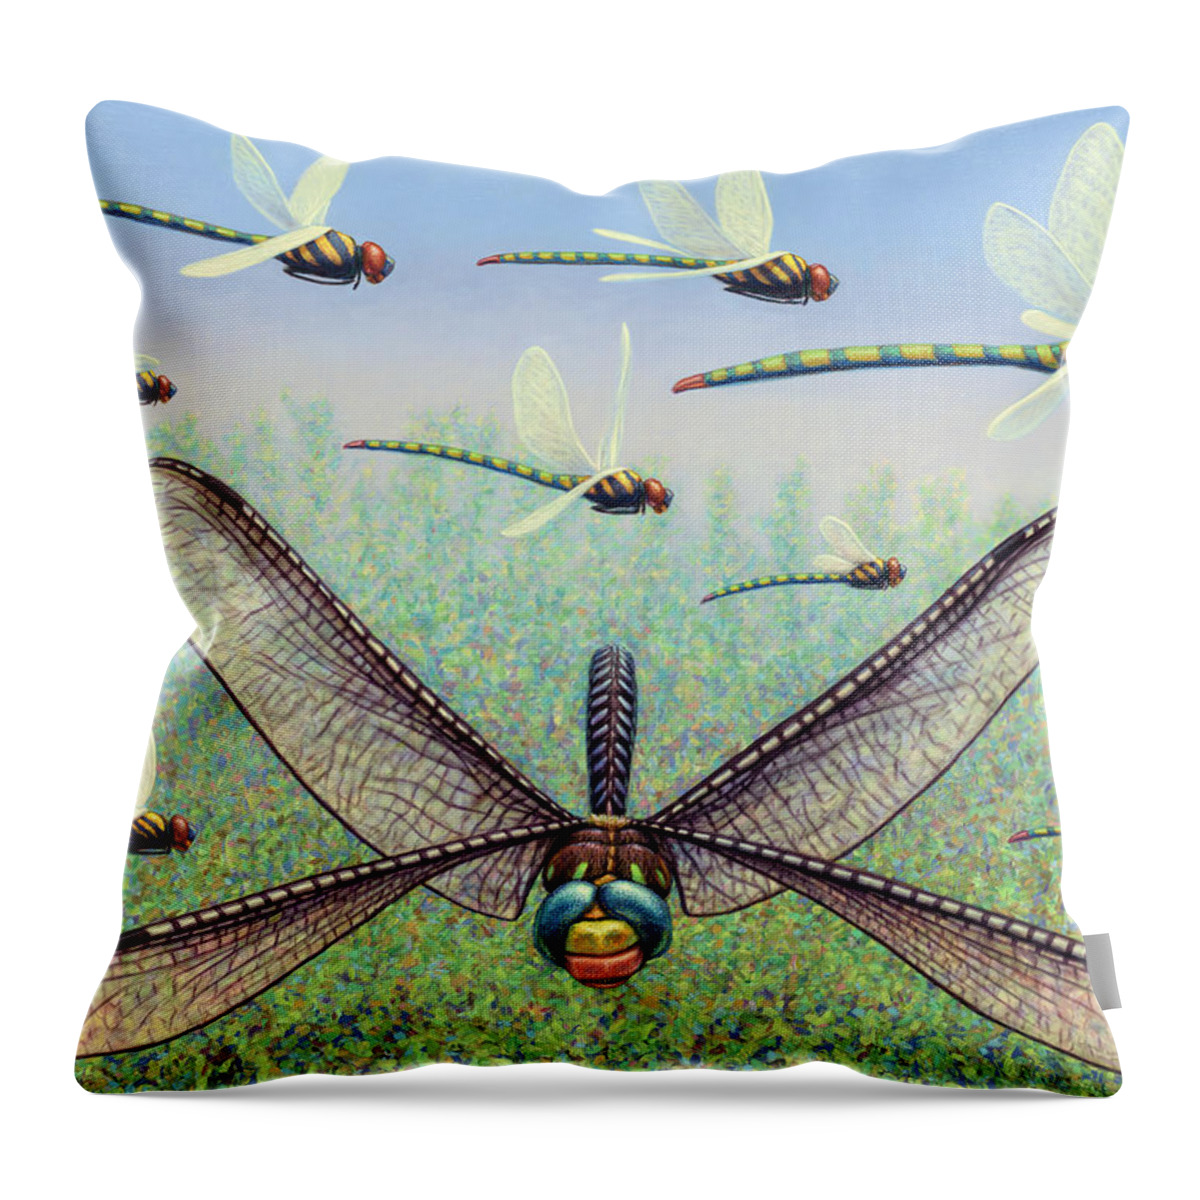 Dragonfly Throw Pillow featuring the painting Crossways by James W Johnson